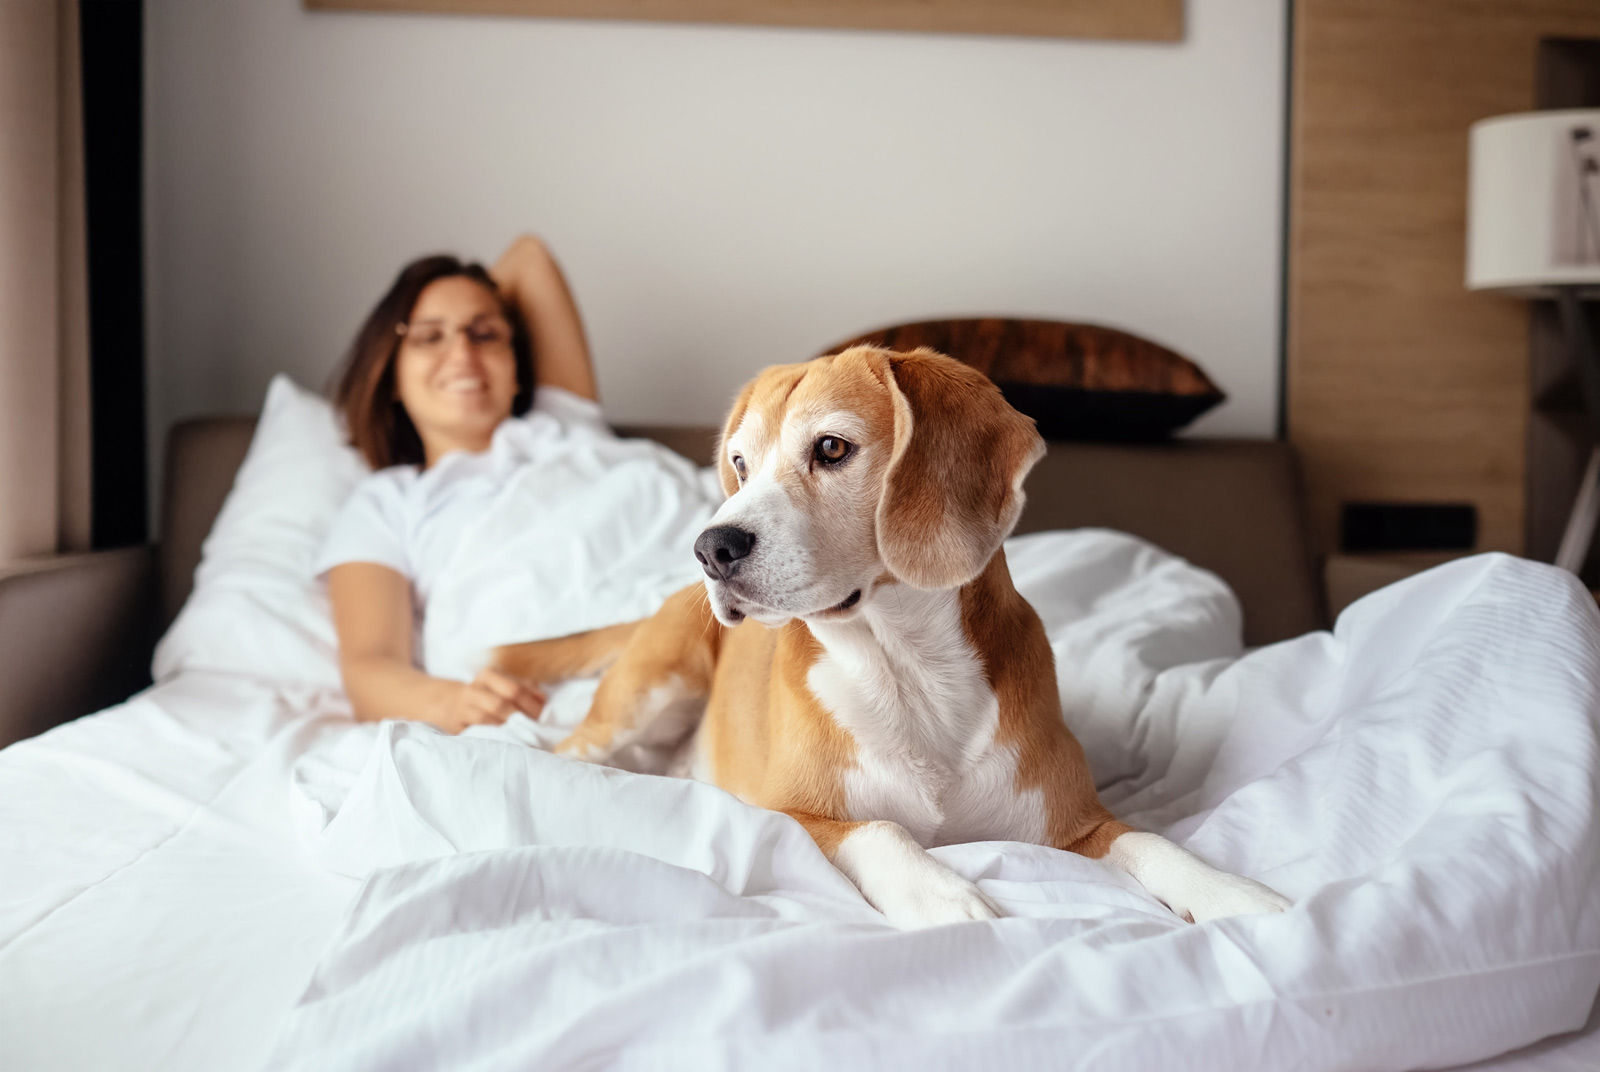 Ensure that Fido is safe and comfortable when staying at pet-friendly hotels in Medicine Hat.